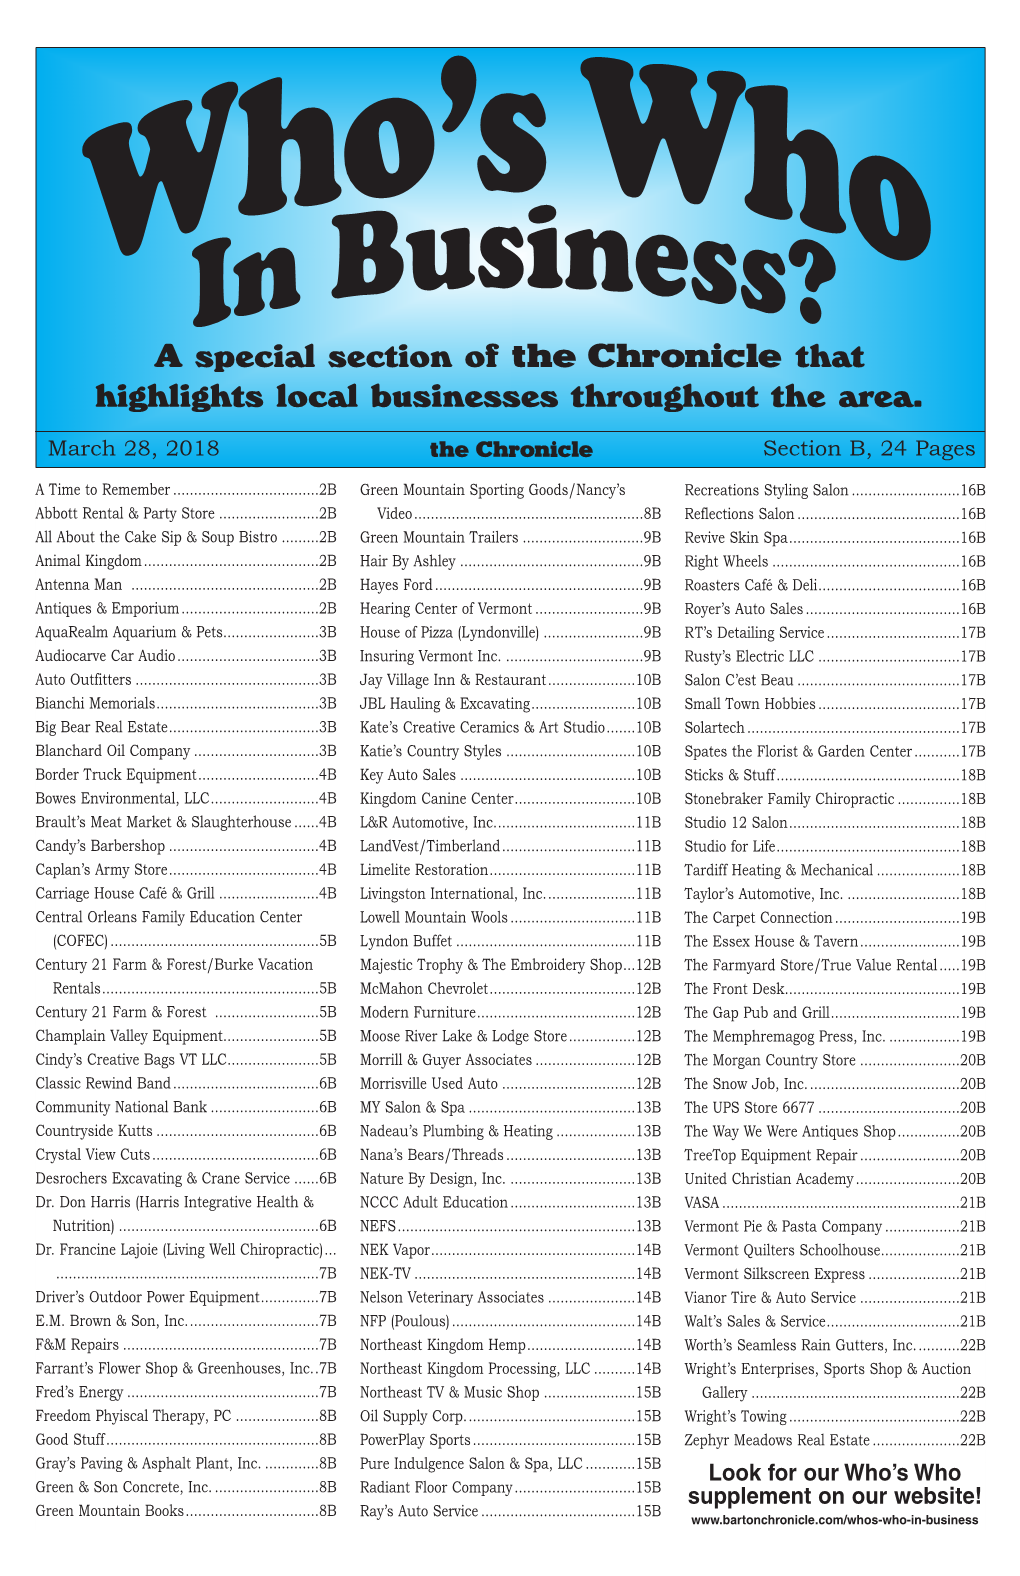 A Special Section of the Chronicle That Highlights Local Businesses